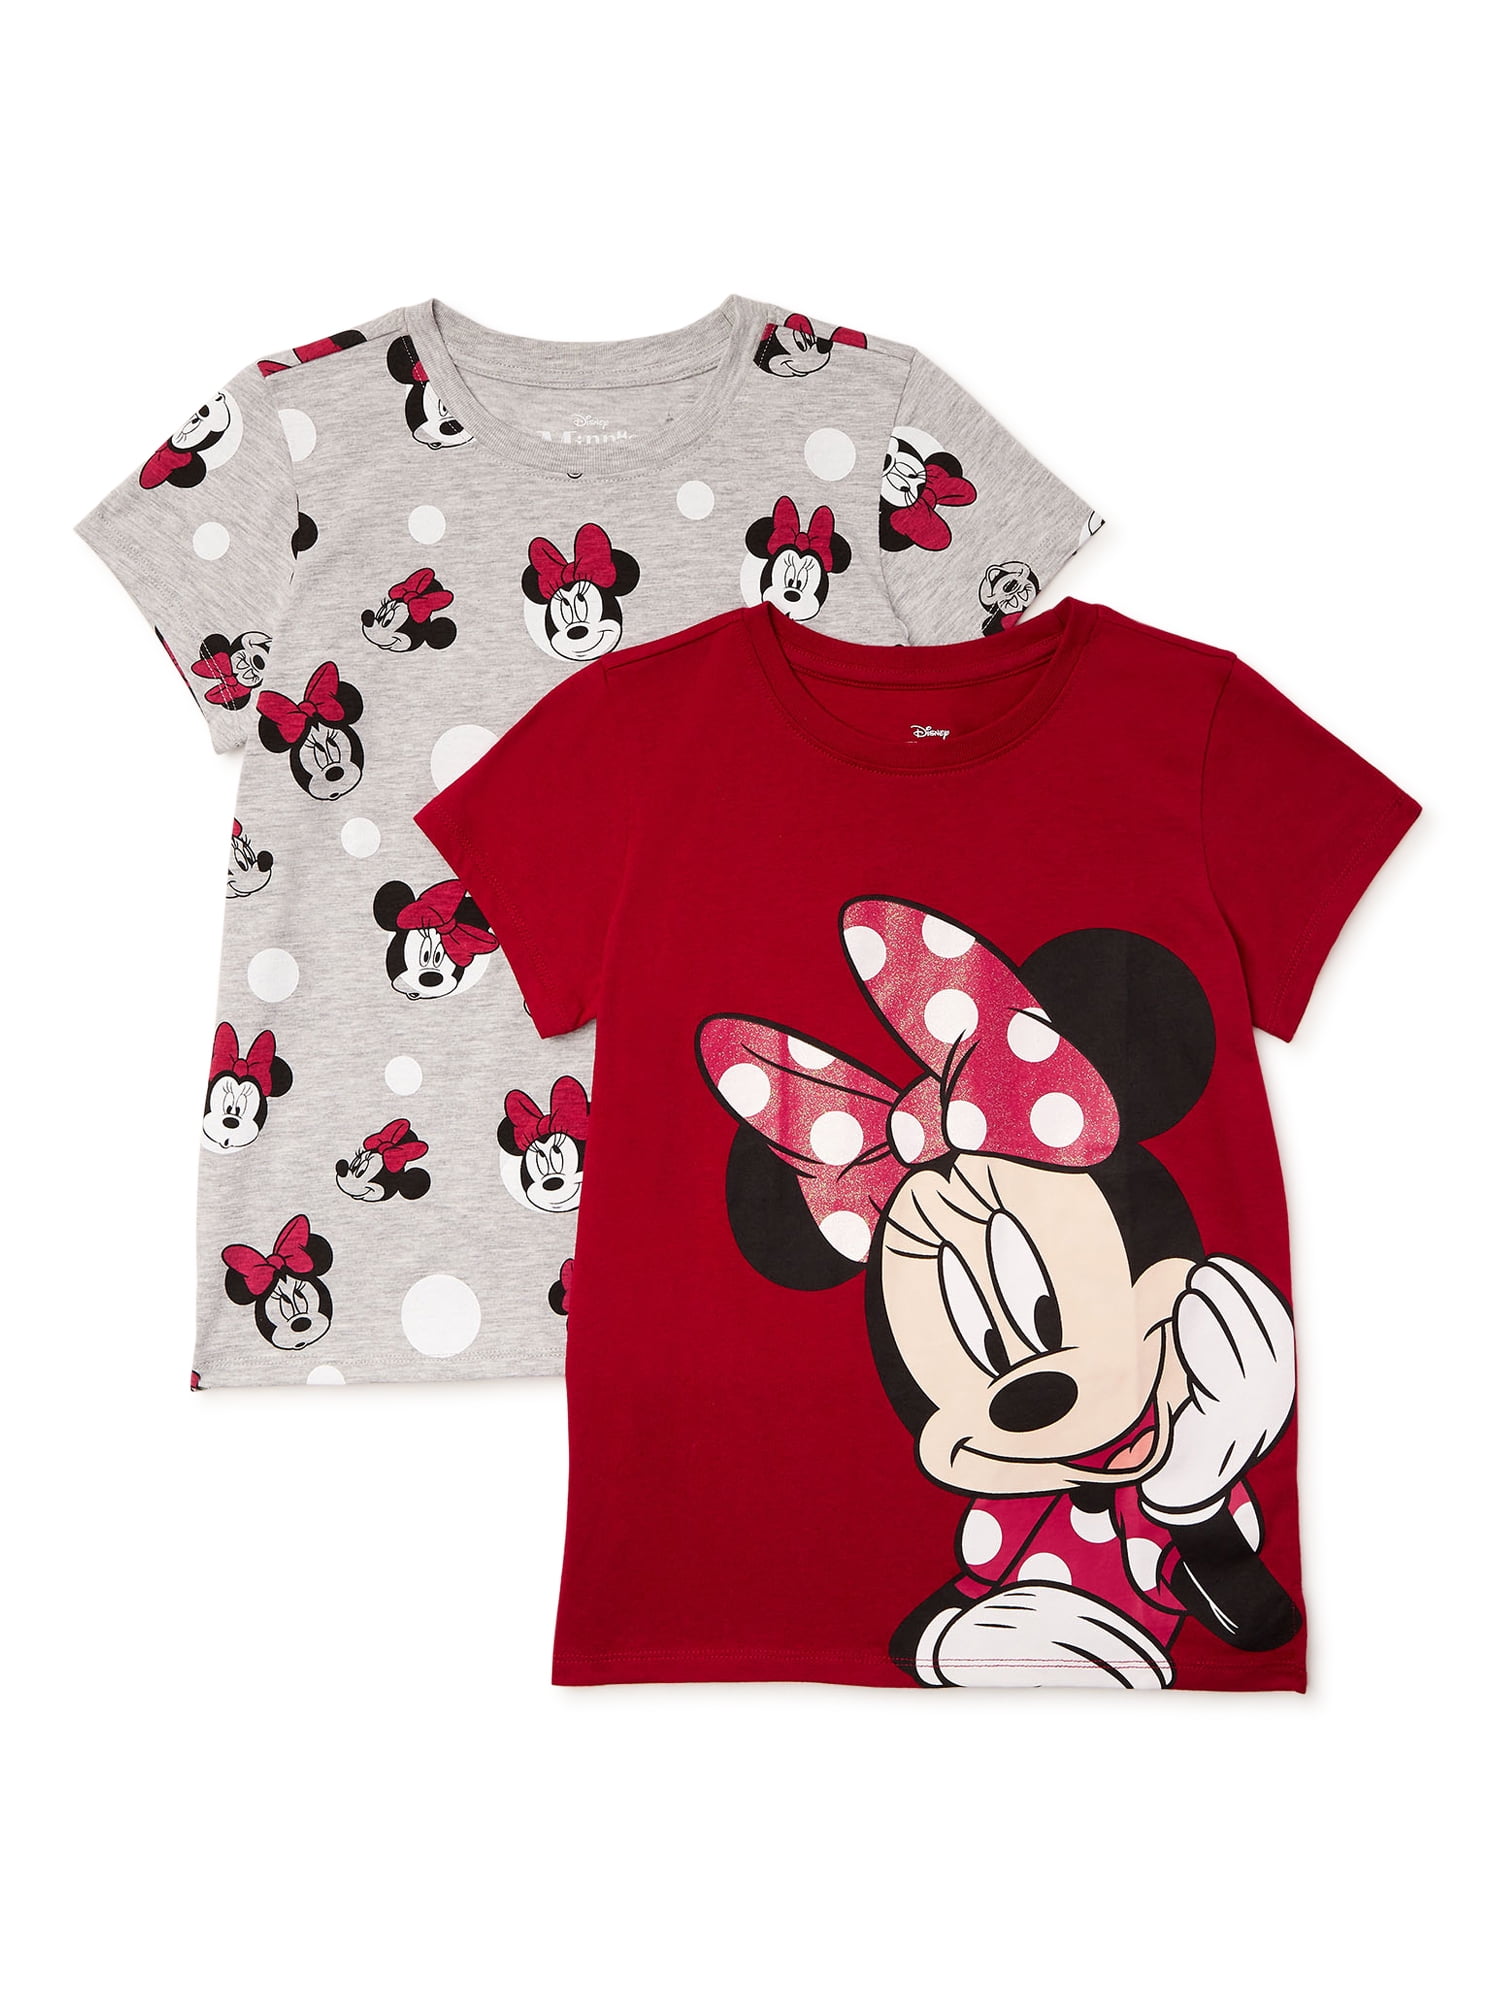 Disney Minnie Mouse Girls short sleeve shirt  Small 6-6X Gray white striped NEW